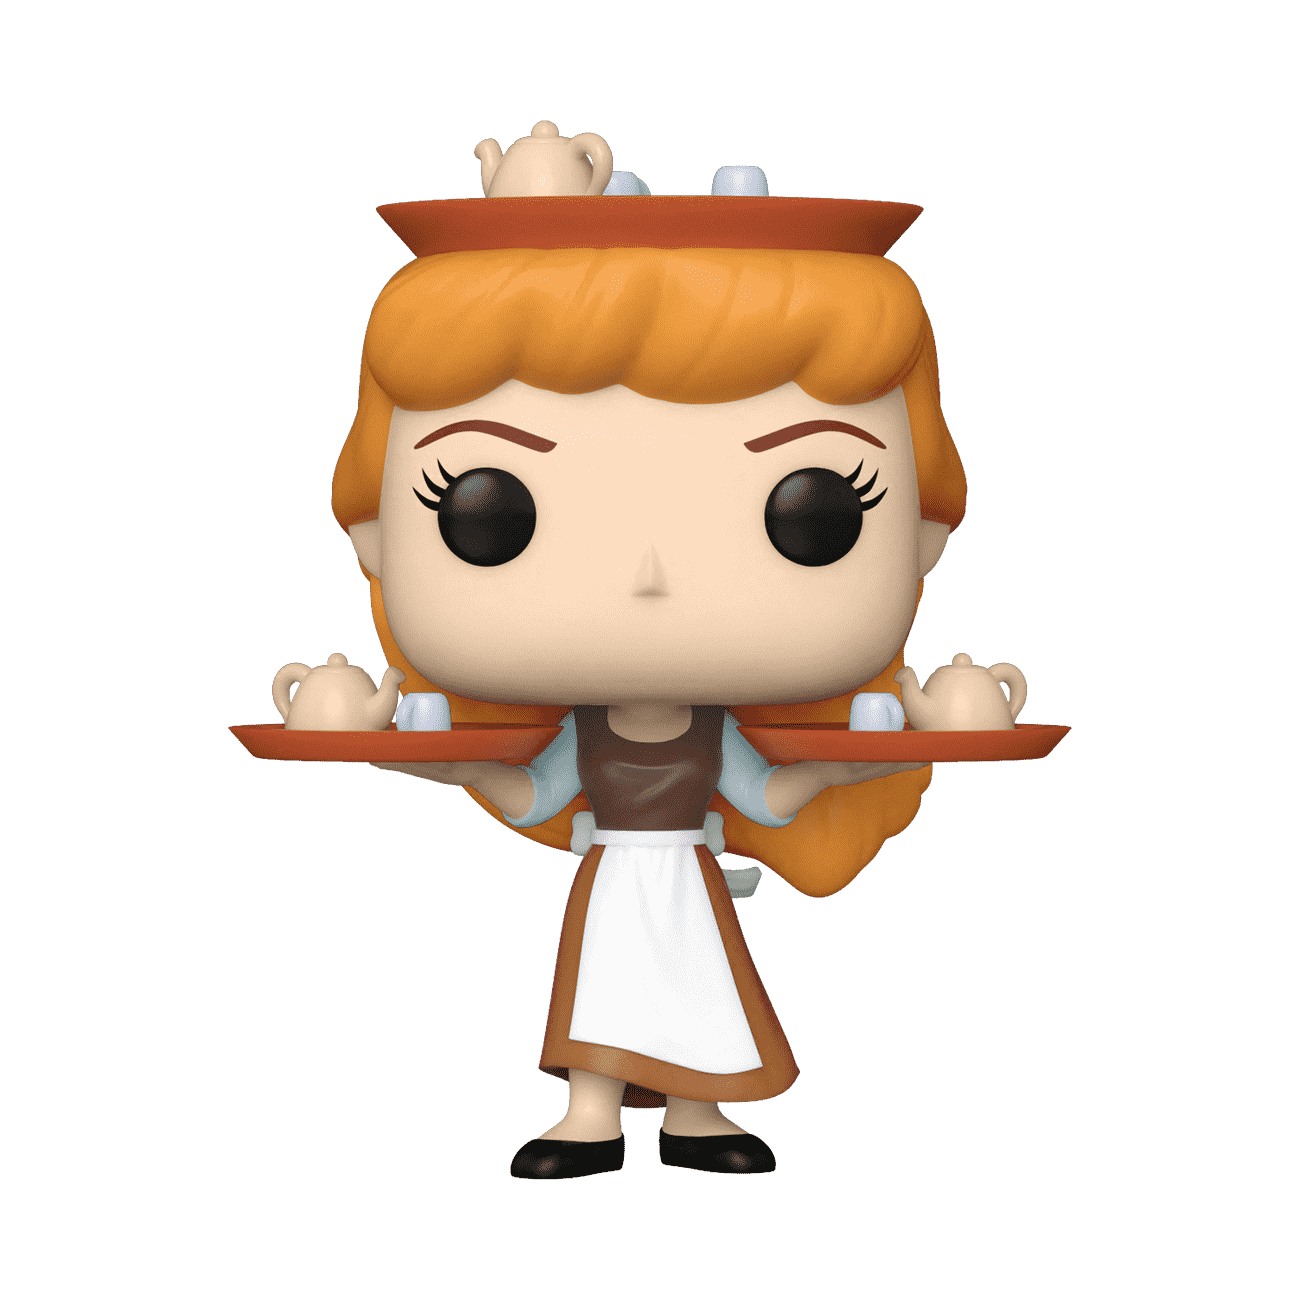 Buy Pop! Cinderella with Trays at Funko.